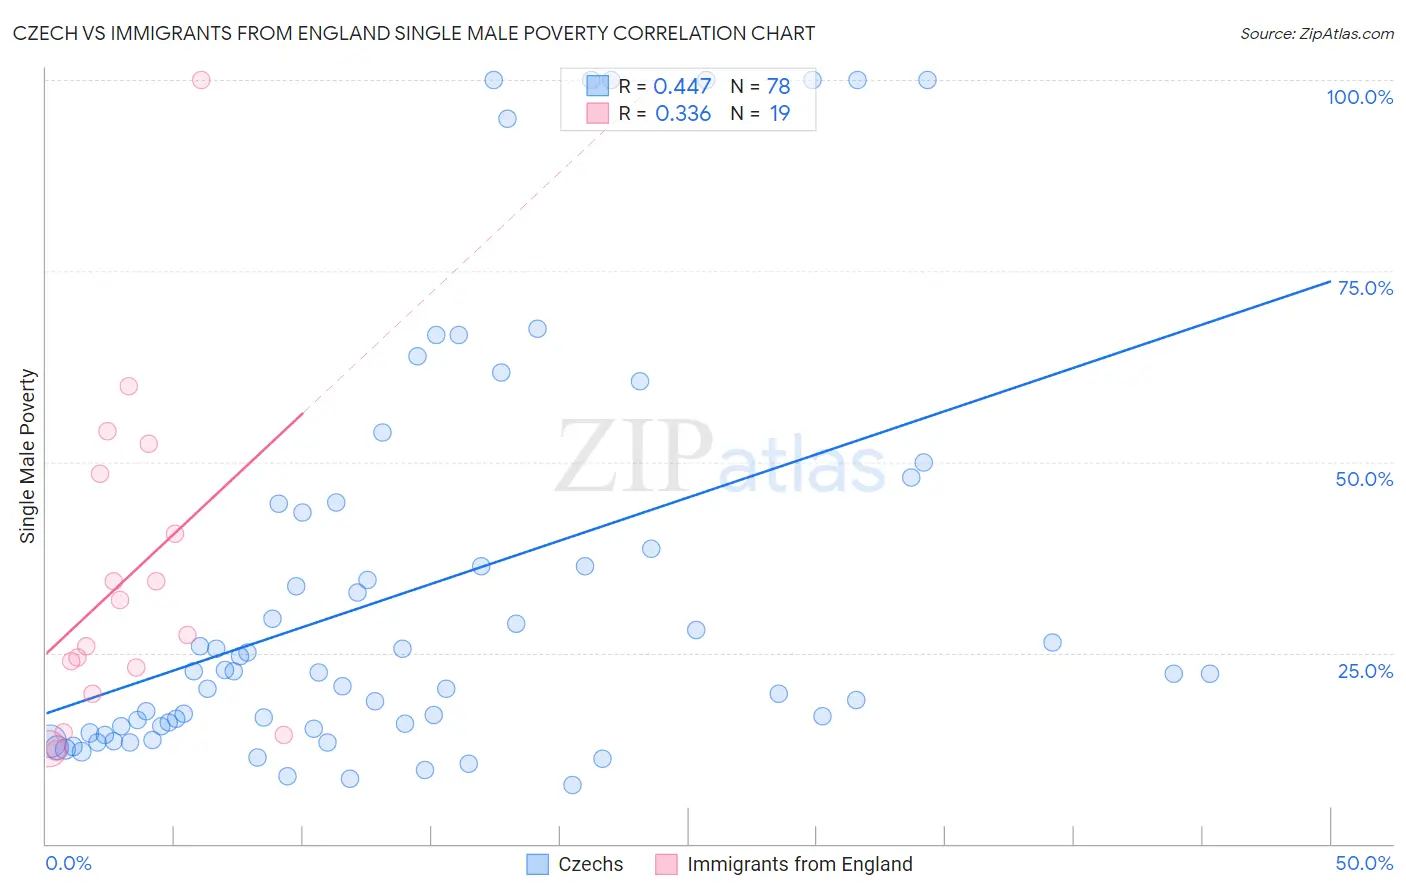 Czech vs Immigrants from England Single Male Poverty